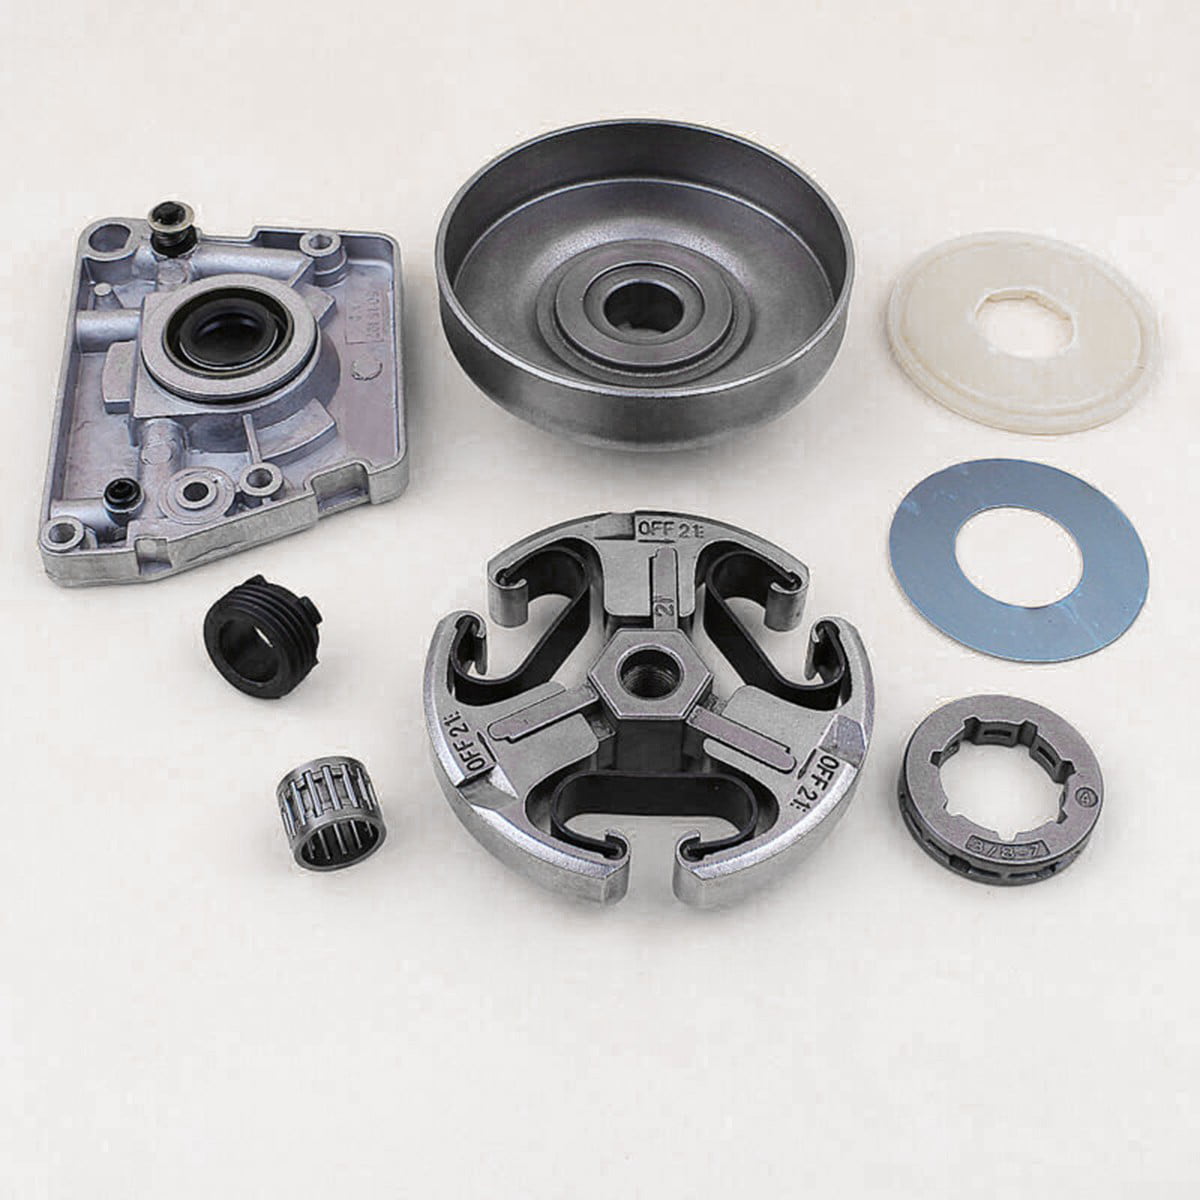 Details about   Clutch Oil Pump For Jonsered 625,625II,630,670,670 CHAMP Chainsaw 3/8"Pitch 7T 